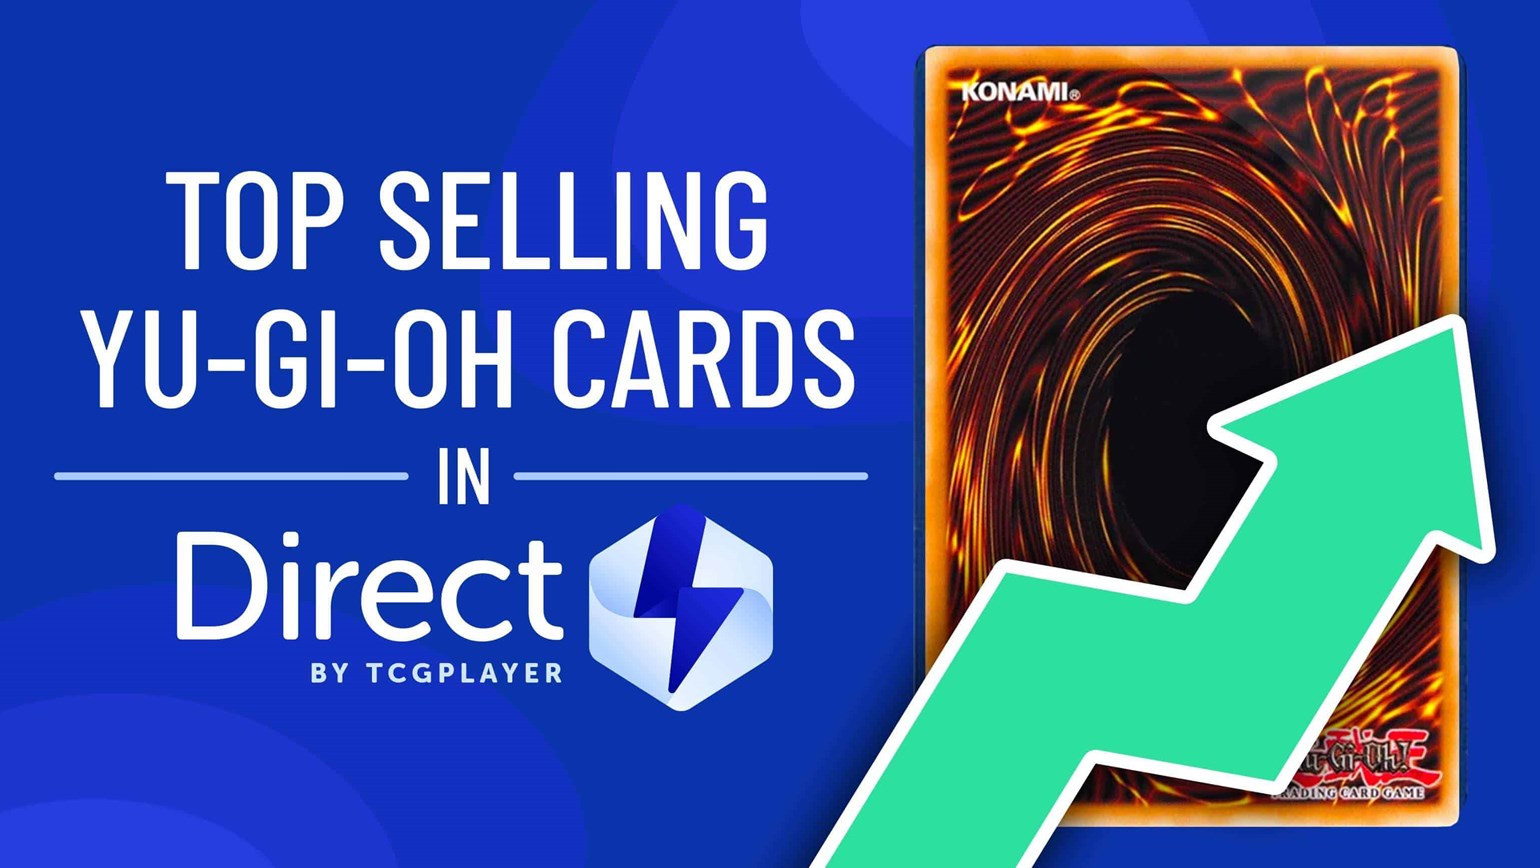 November Top Selling Yu-Gi-Oh! Cards Under $25 in Direct by TCGplayer